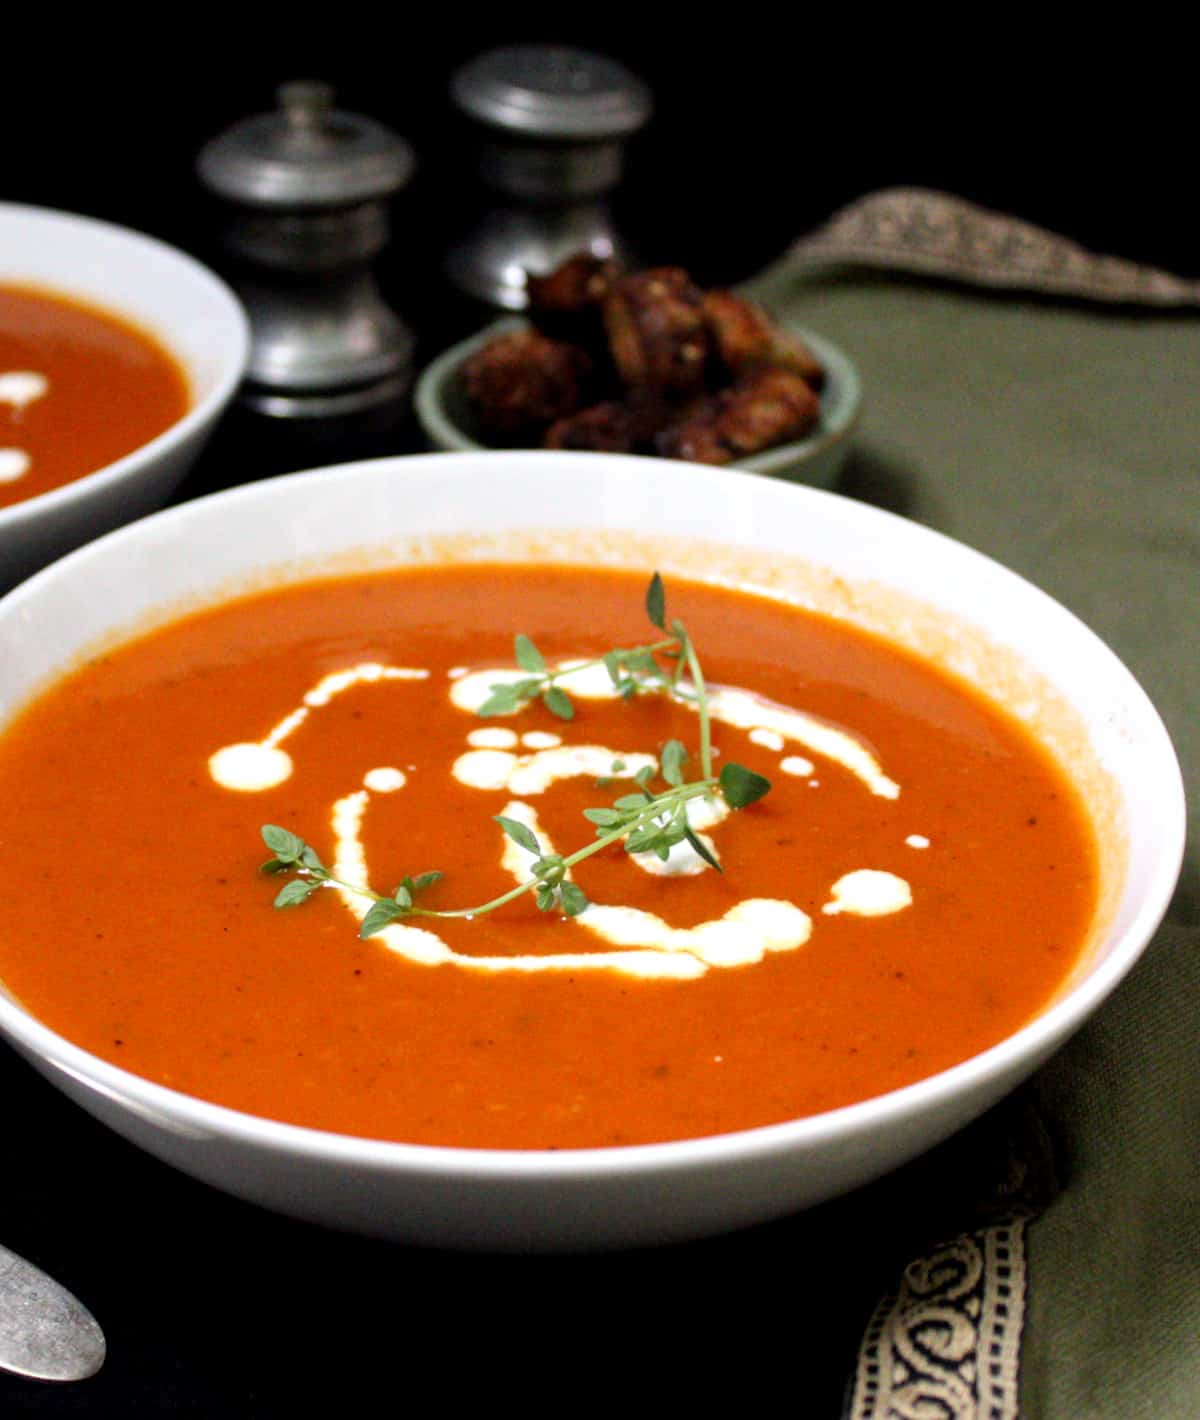 A front partial shot of a bowl of bright red tomato soup with sprigs of thyme, cashew cream and croutons on the side, and salt and pepper shakers and a green napkin beside.